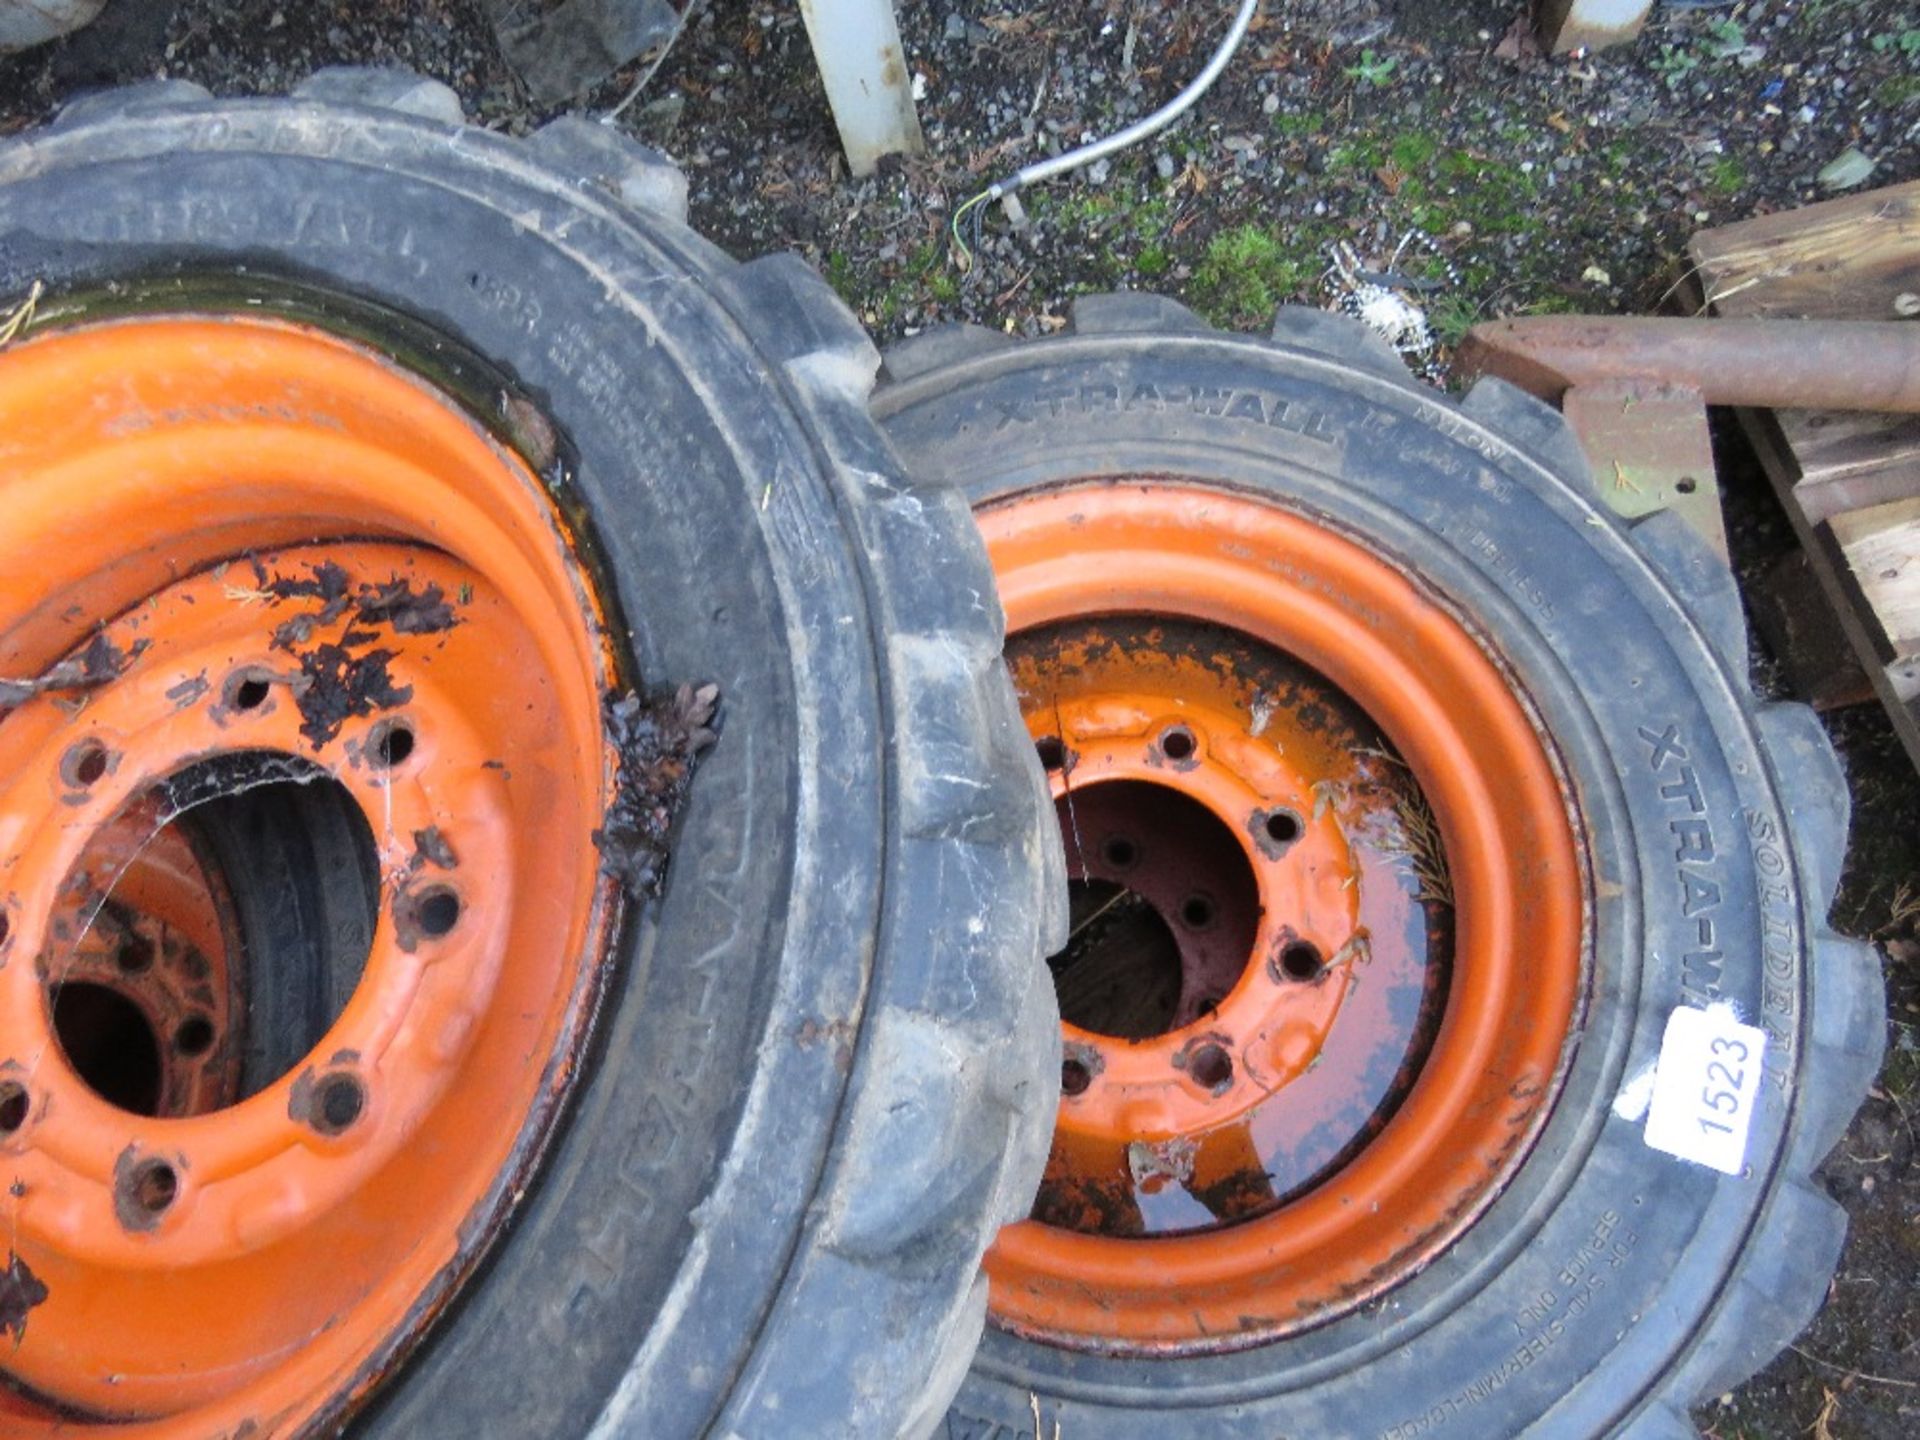 5NO SKID STEER LOADER WHEELS AND TYRES 10-16.5 SIZE. DIRECT FROM LOCAL SMALLHOLDING. THIS LOT IS - Image 4 of 5